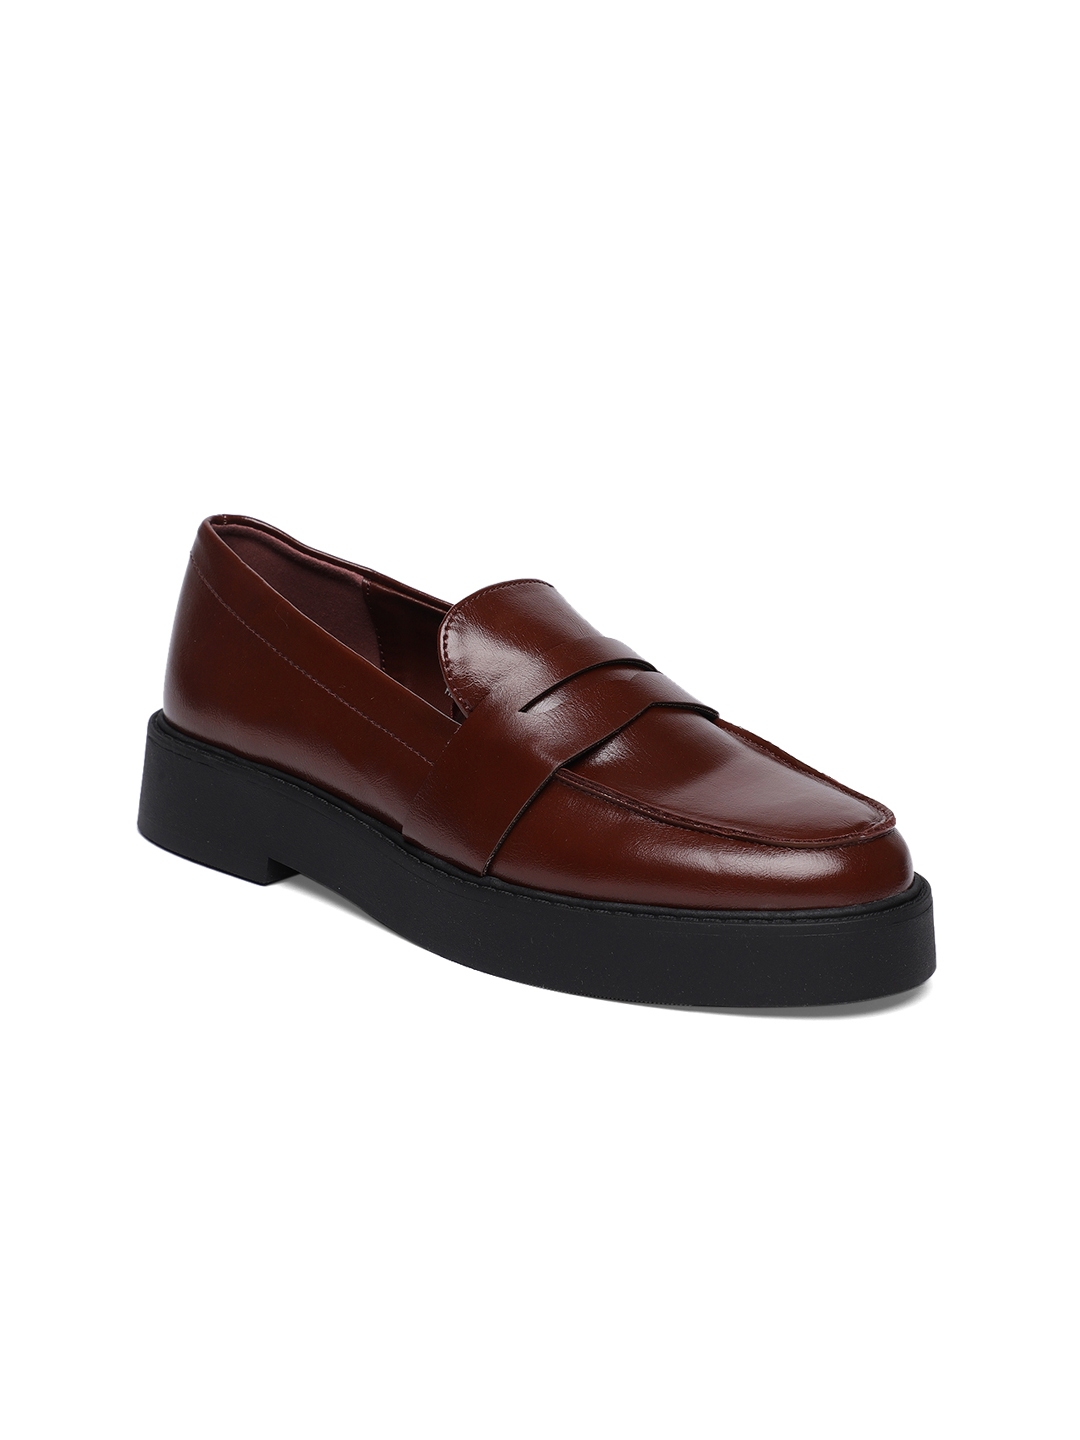 Buy FOREVER 21 Maroon Loafers - Shoes for Women |